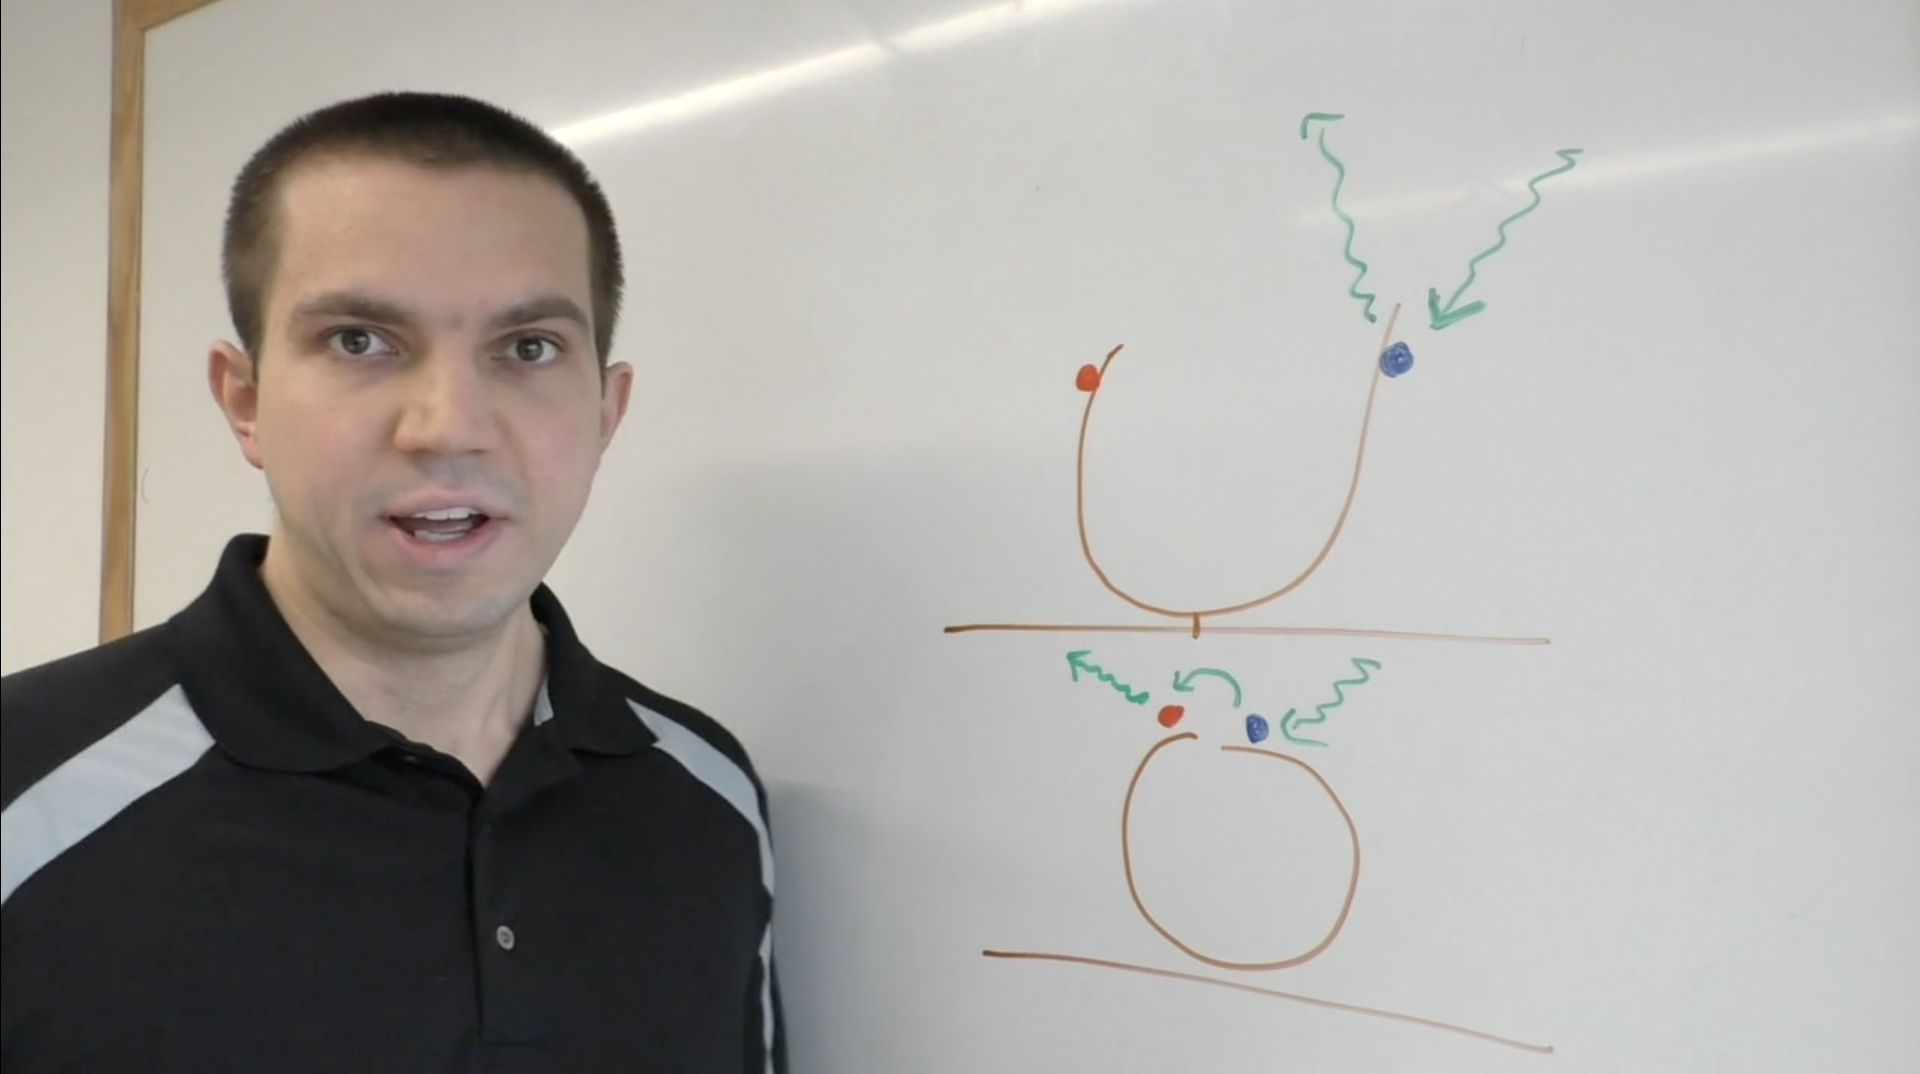 Young man standing in front of a whiteboard drawing of DNA